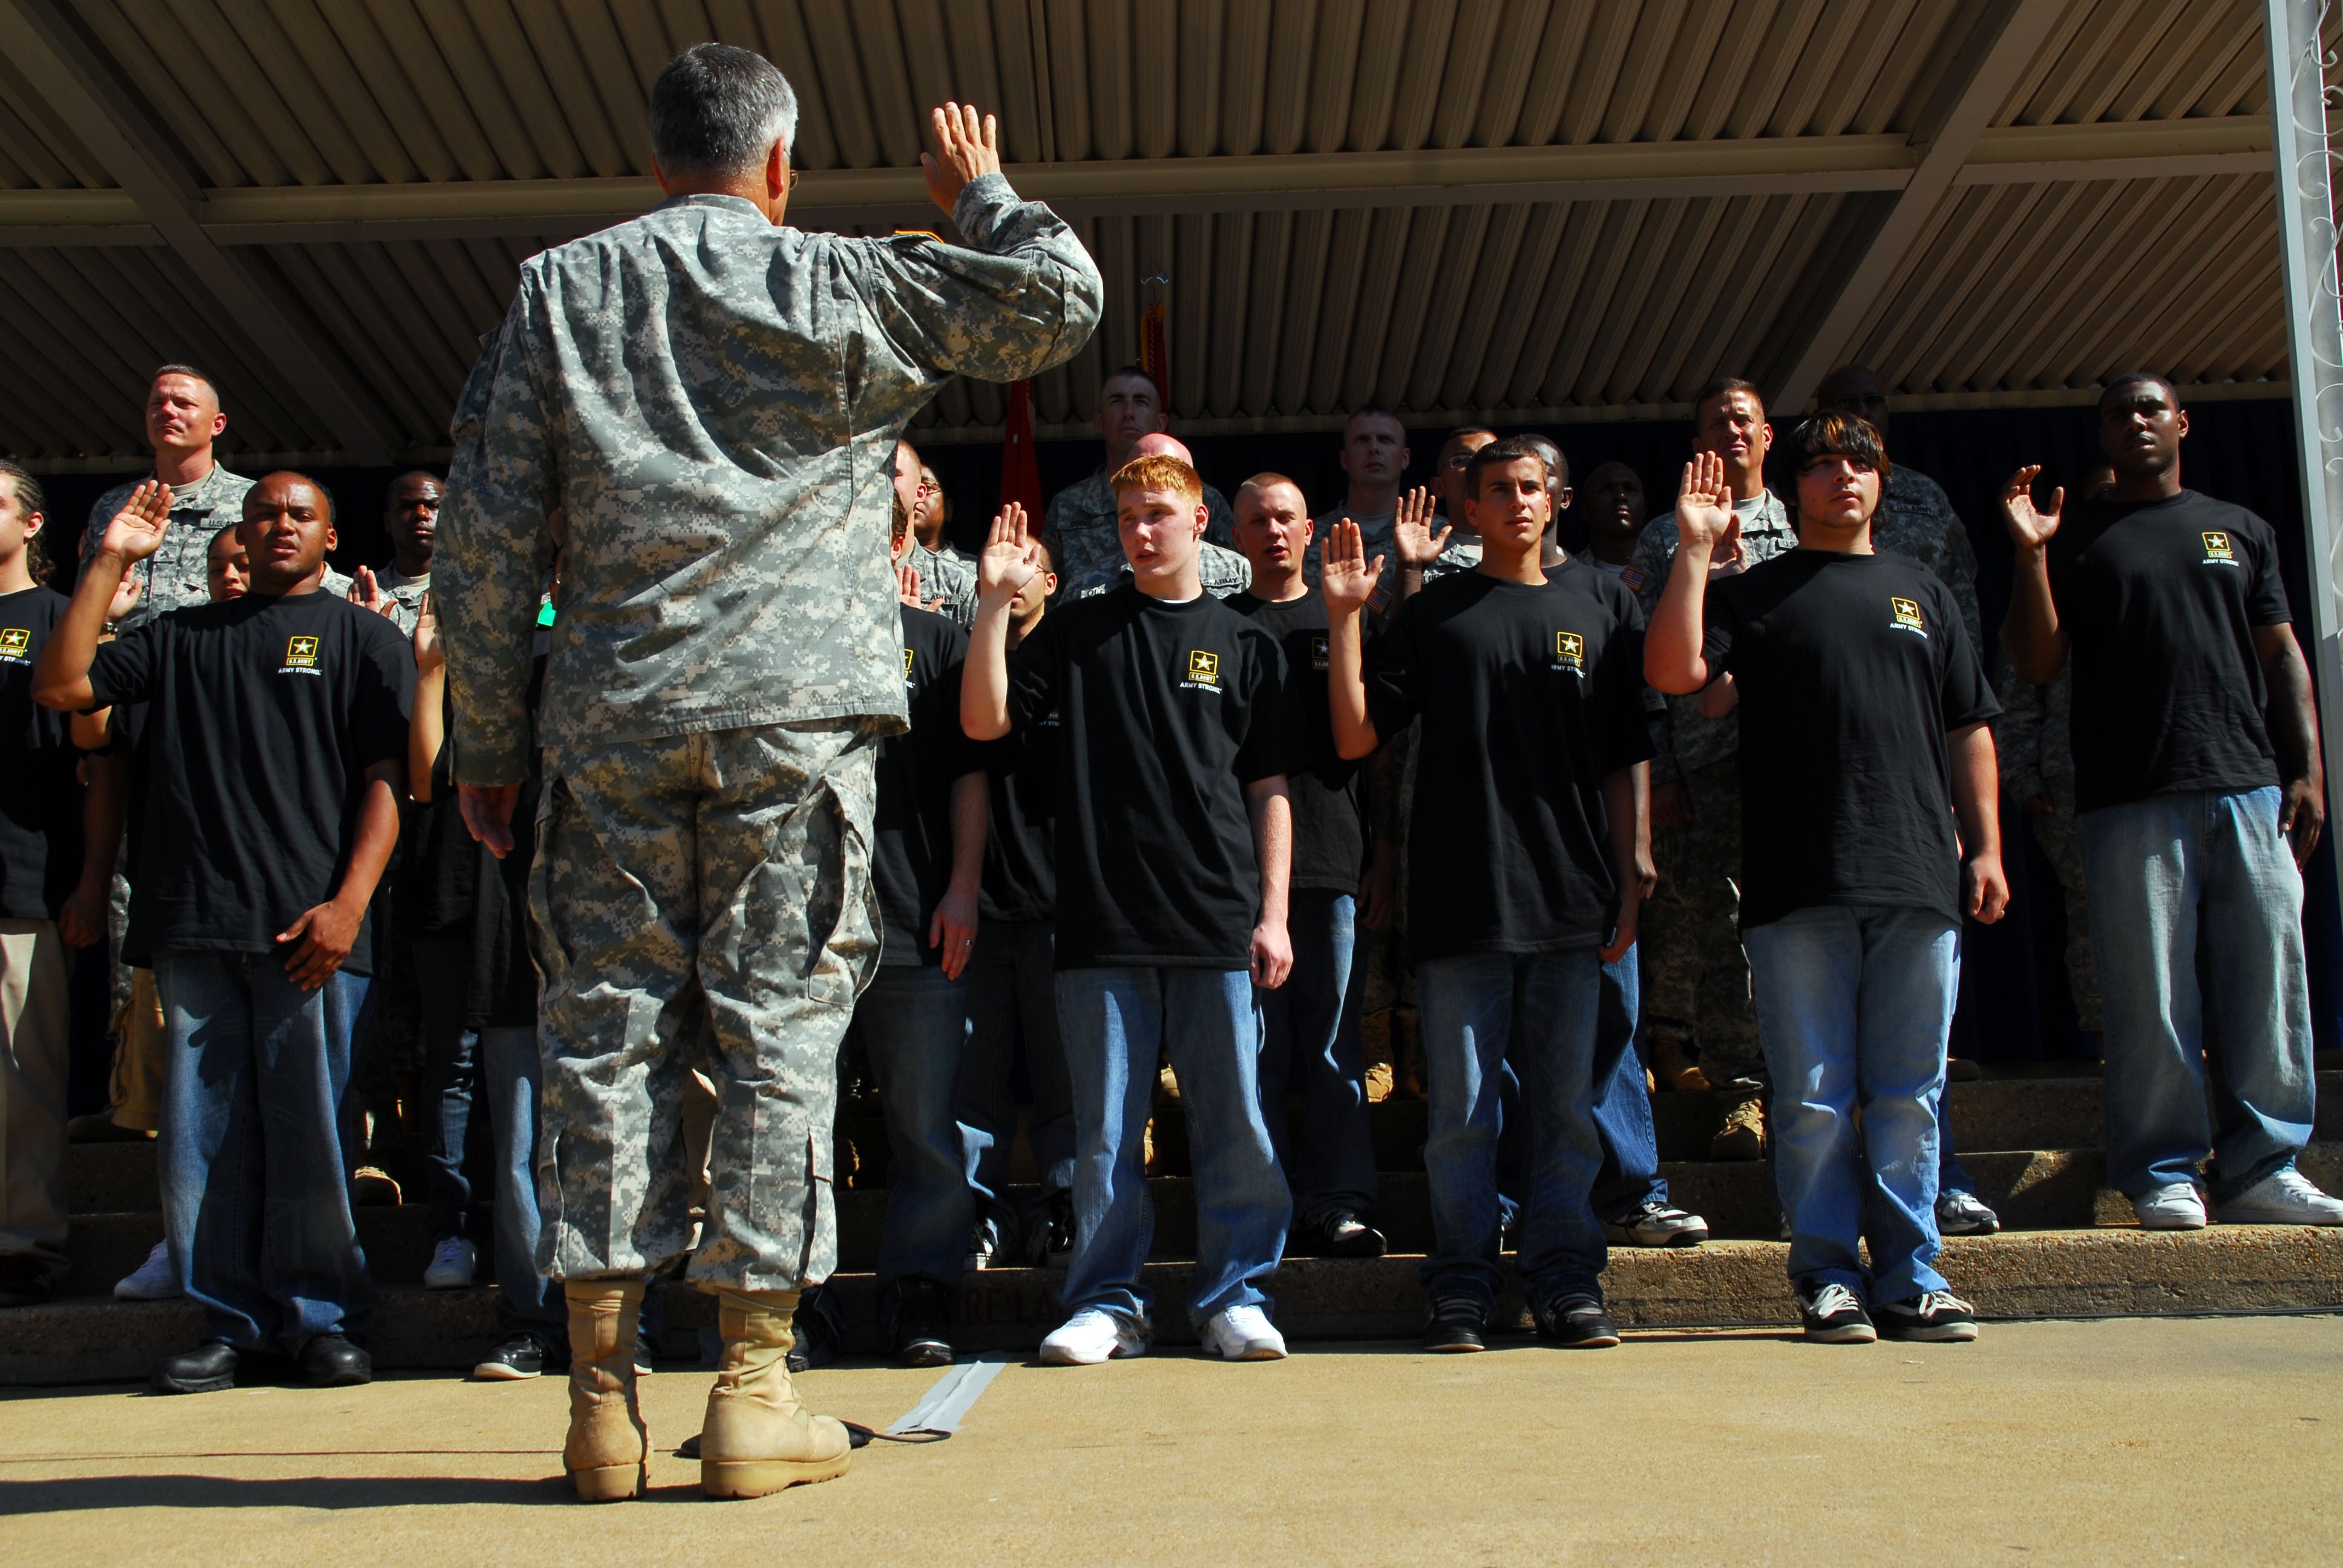 Army Enlistment Pictures July marks 40th anniversary of all-volunteer Army